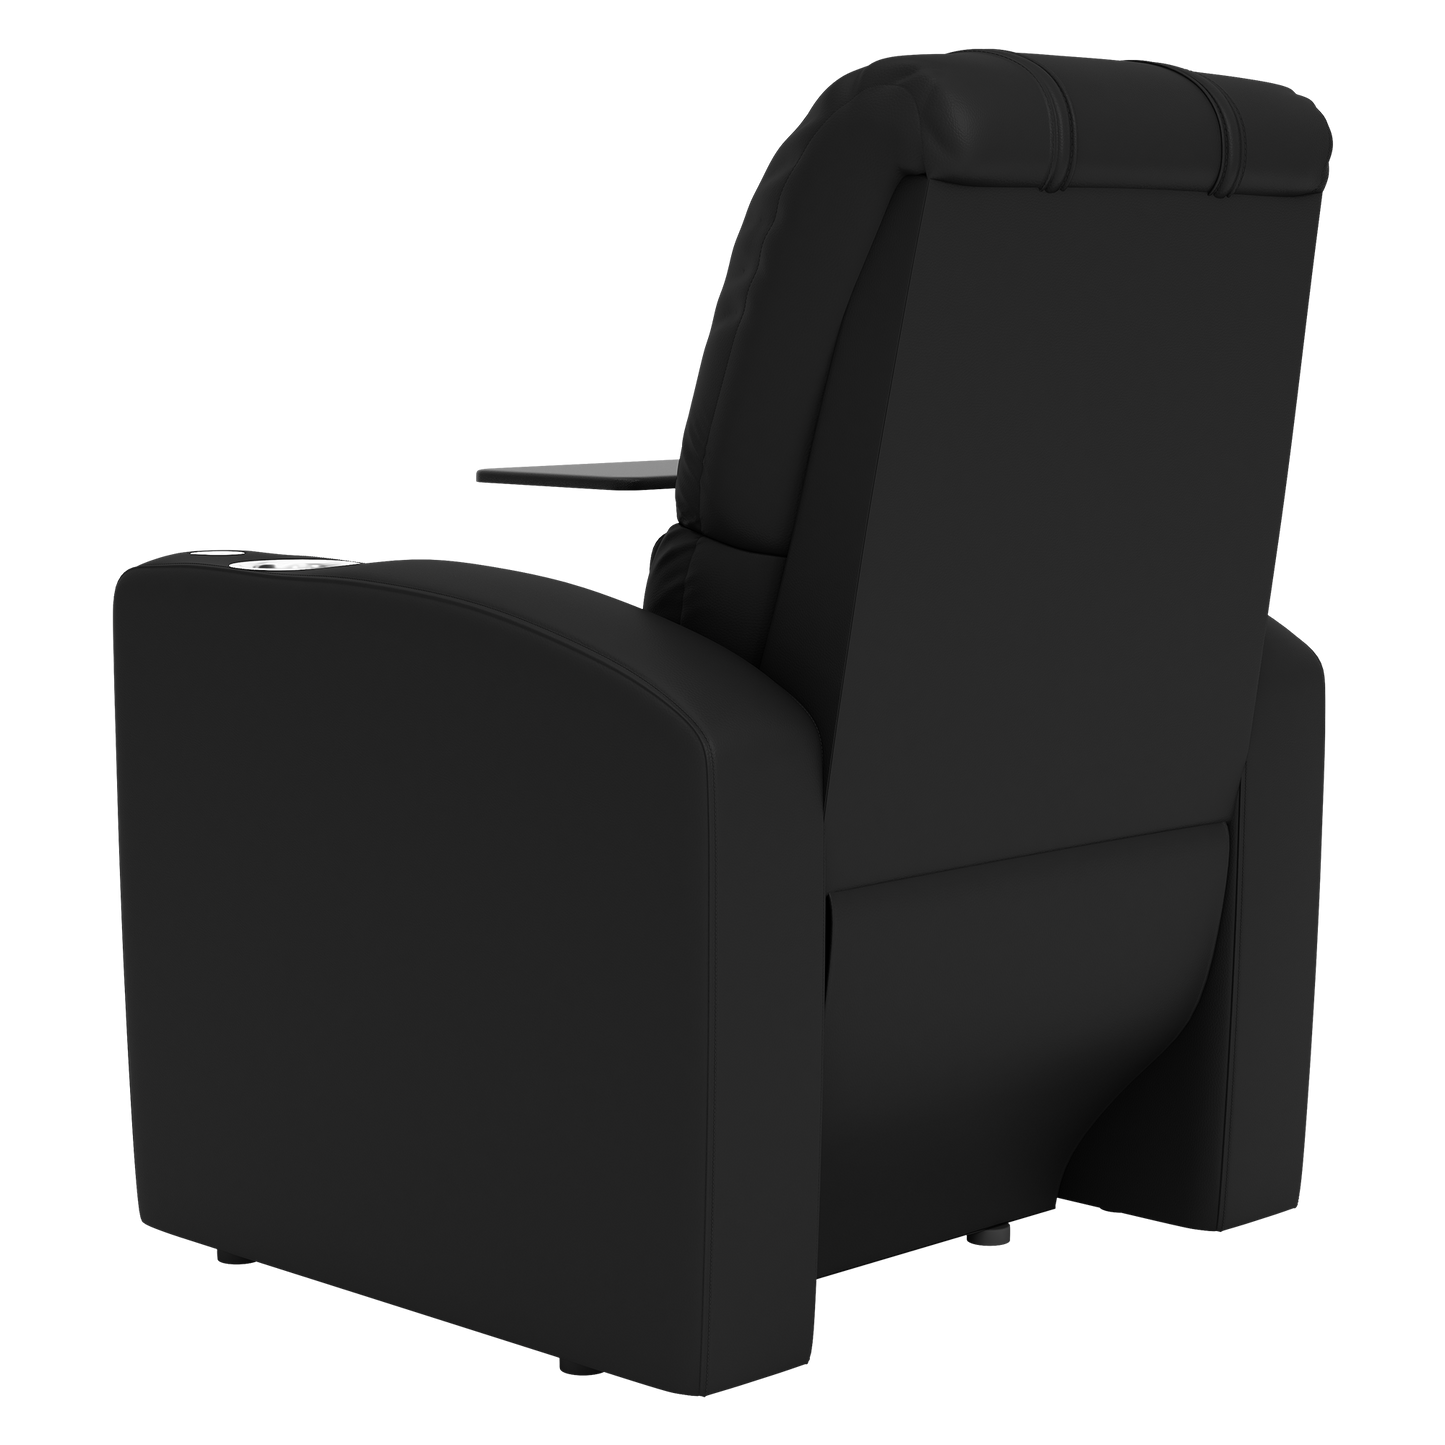 Stealth Power Plus Recliner with Rutgers Scarlet Knights Logo